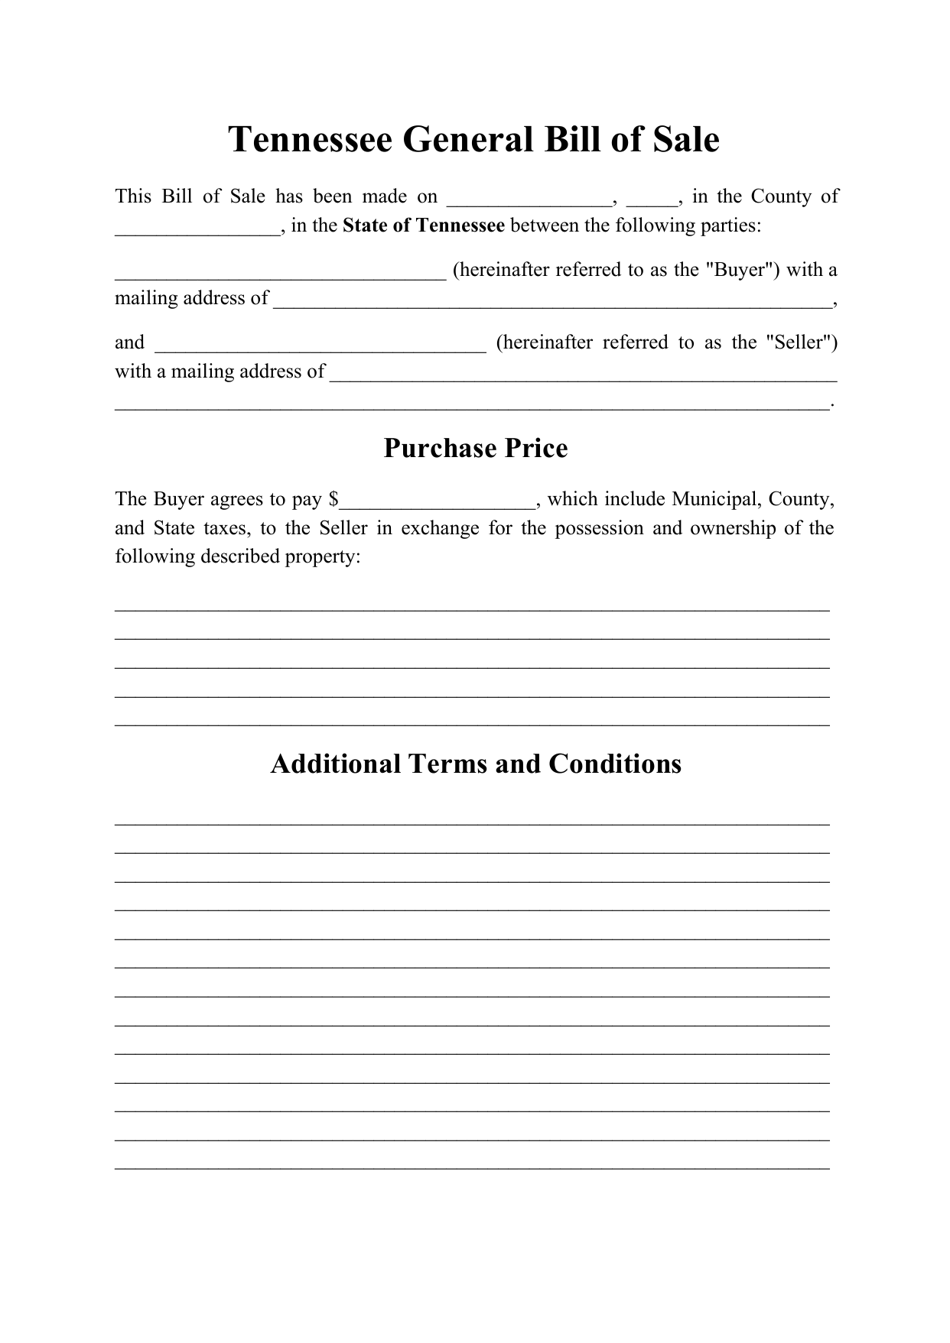 Tennessee Generic Bill of Sale Form Fill Out, Sign Online and